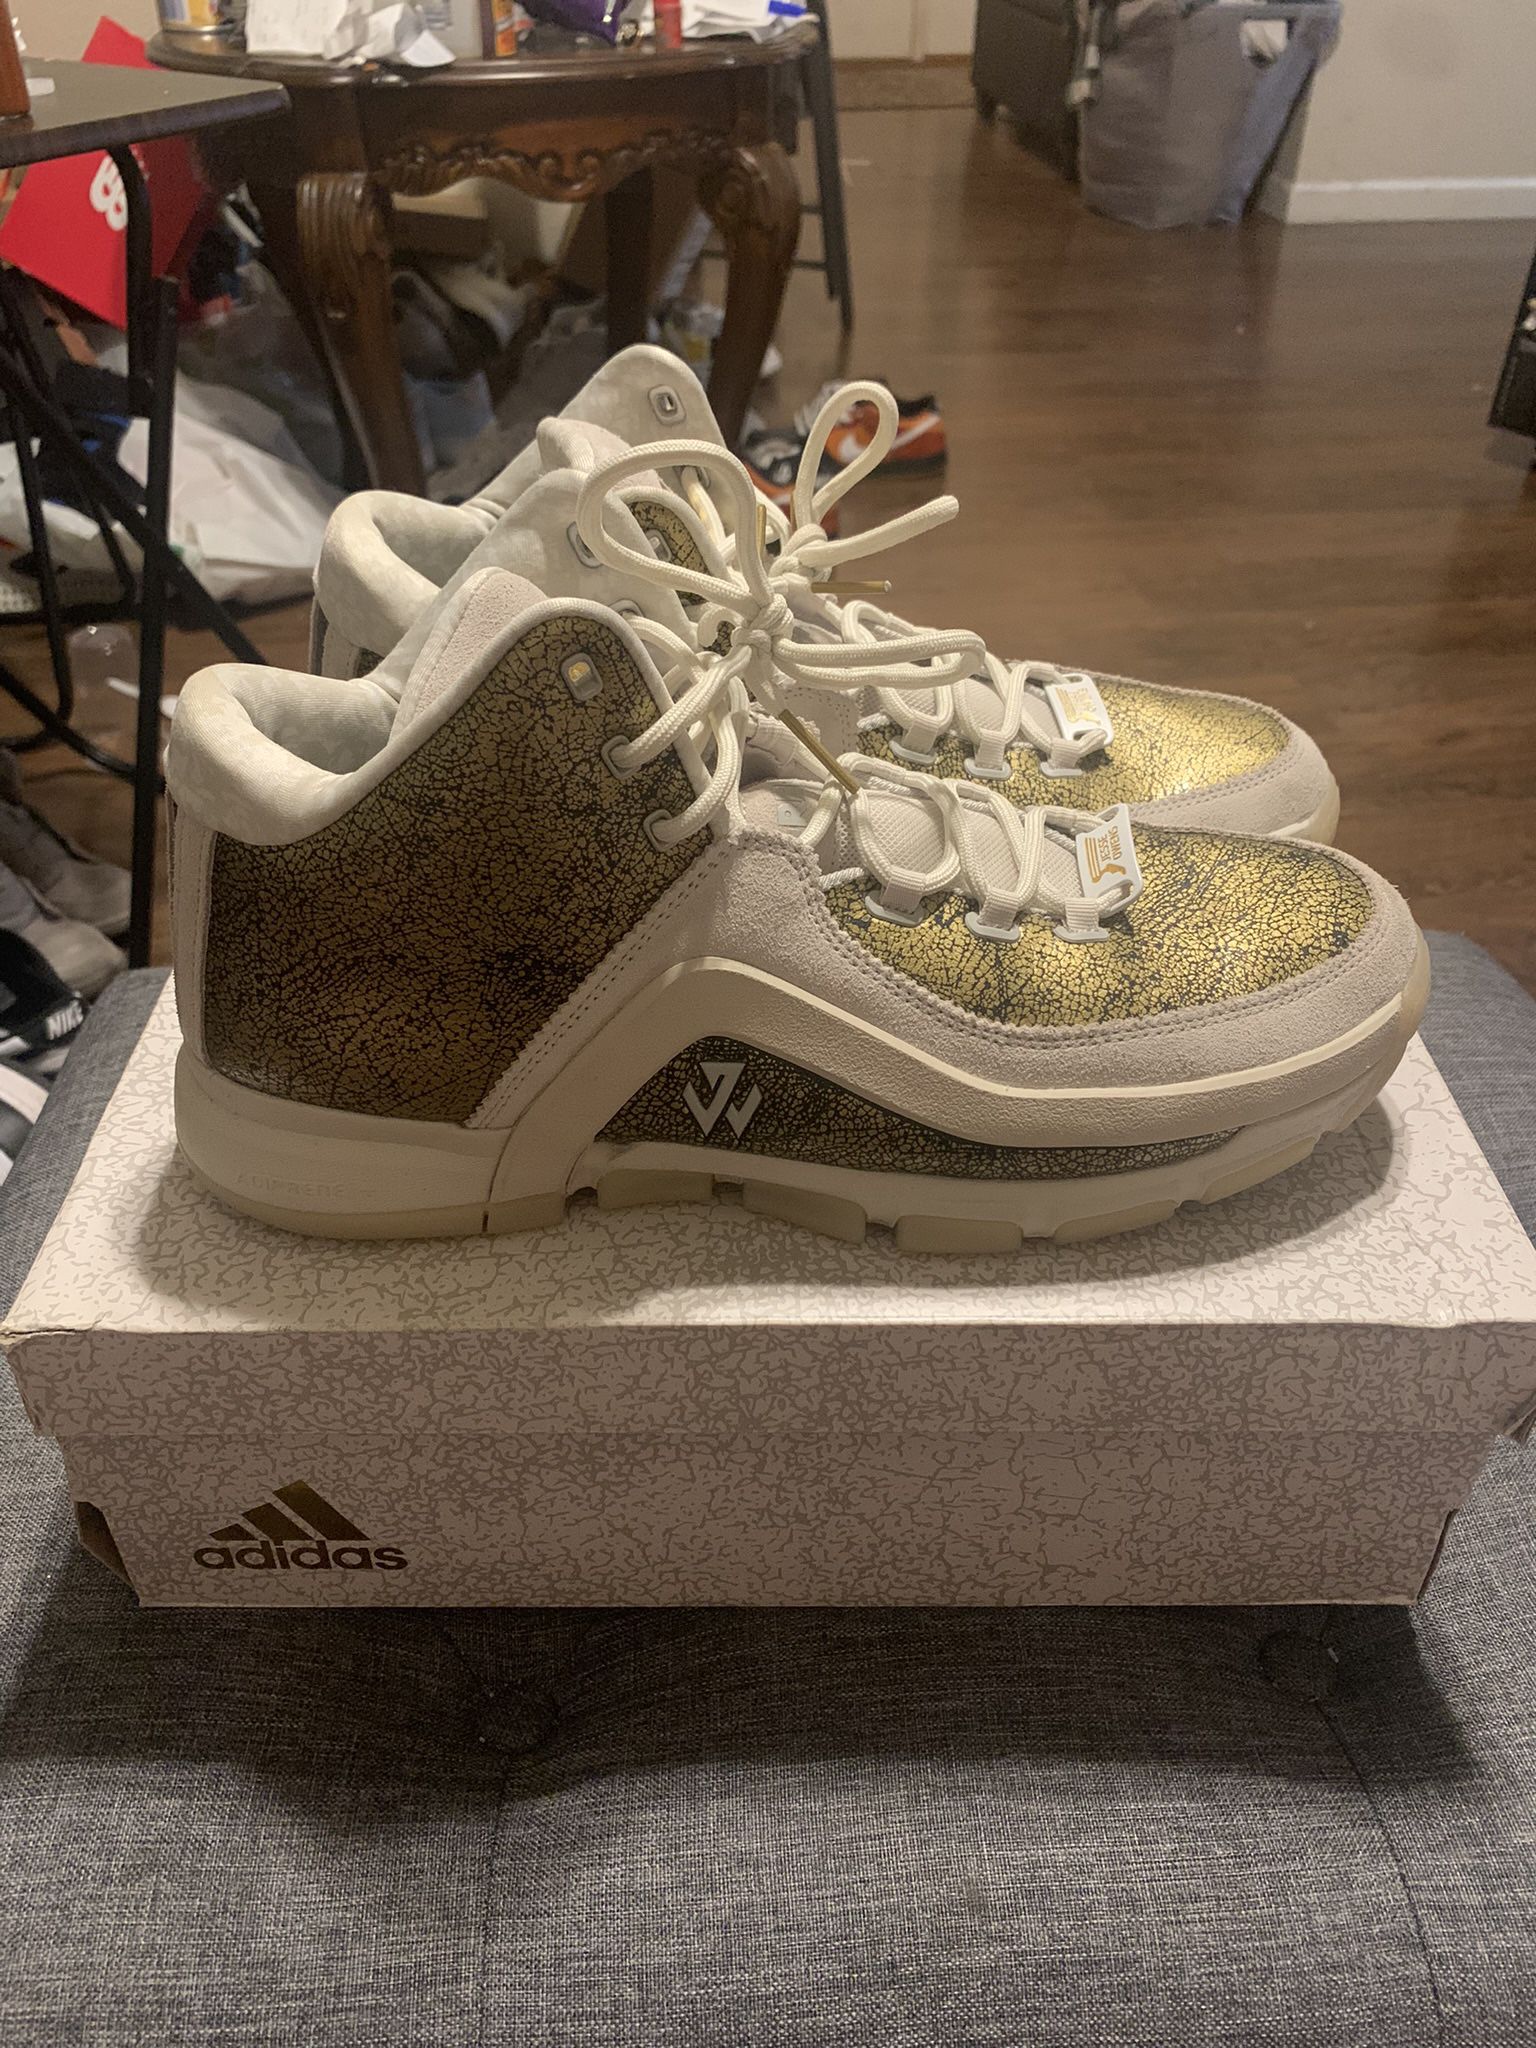 Adidas John Wall x Owens for Sale in Ceres, CA -